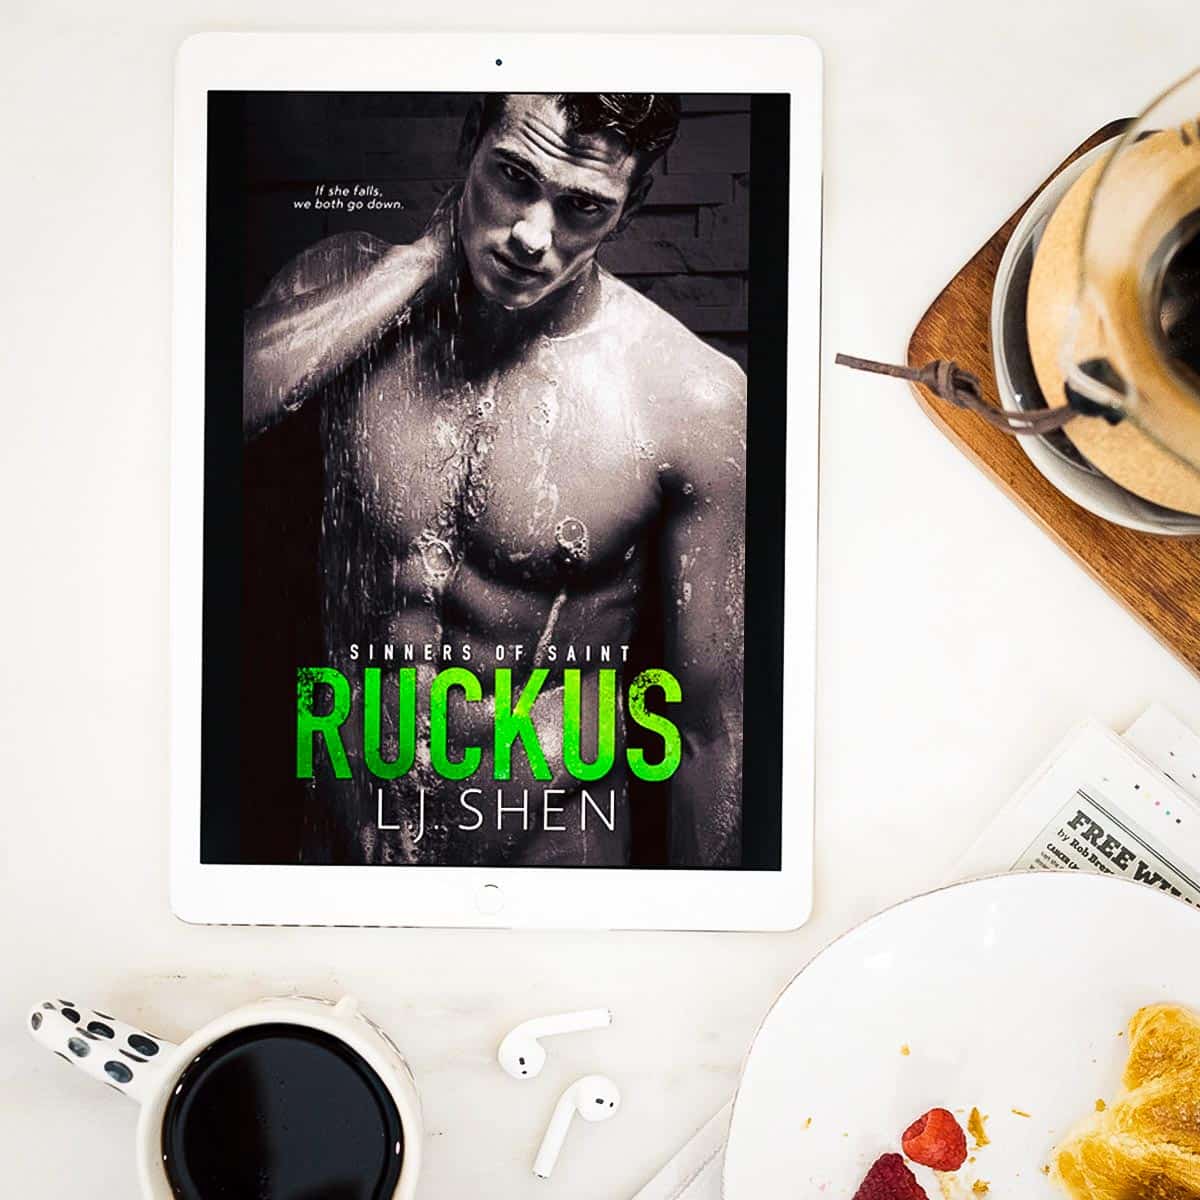 Ruckus by L.J. Shen, the second book of the Sinners of Saint series, is an emotional and angsty forbidden enemies-to-lovers contemporary romance—plus, it's my personal favorite in the series!